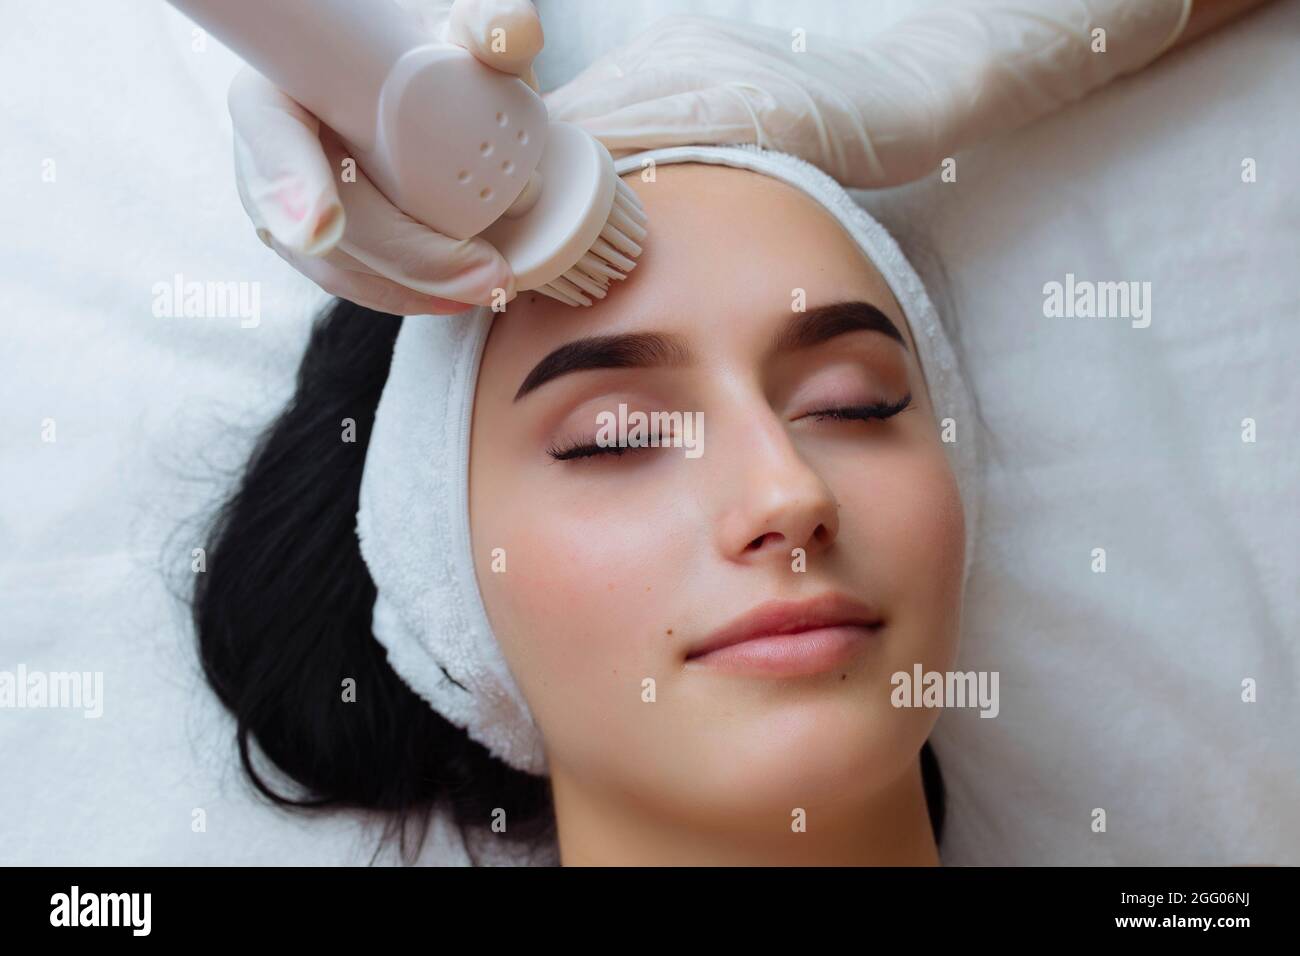 Facial massage. Care skin brushing spa procedure and cosmetology Stock Photo